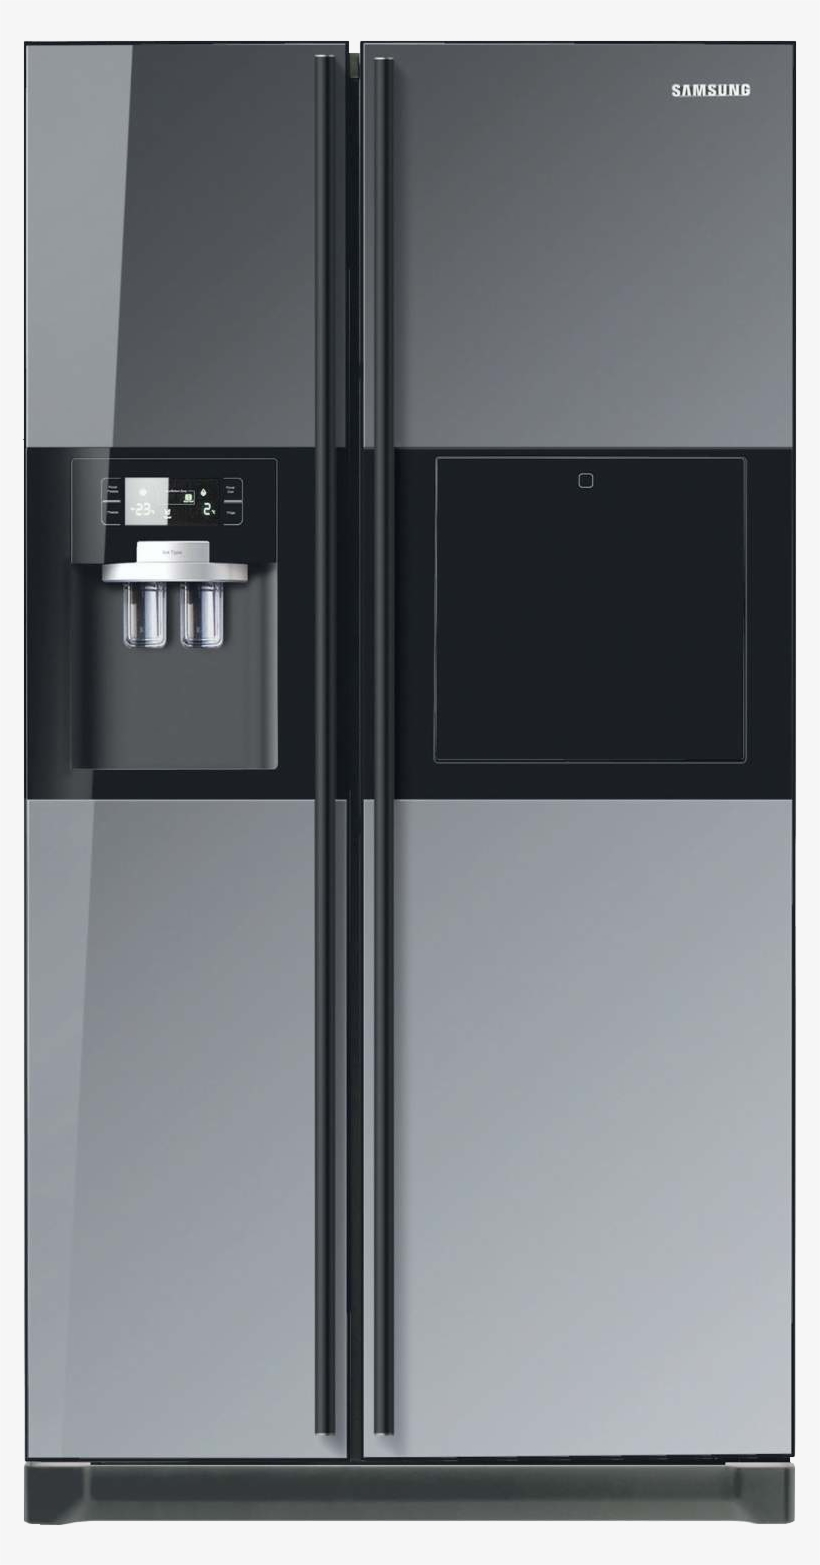 Samsung Side B Side Fridge With Water-ice Dispenser - Samsung Side By Side Mirror Fridge Price, transparent png #2555503